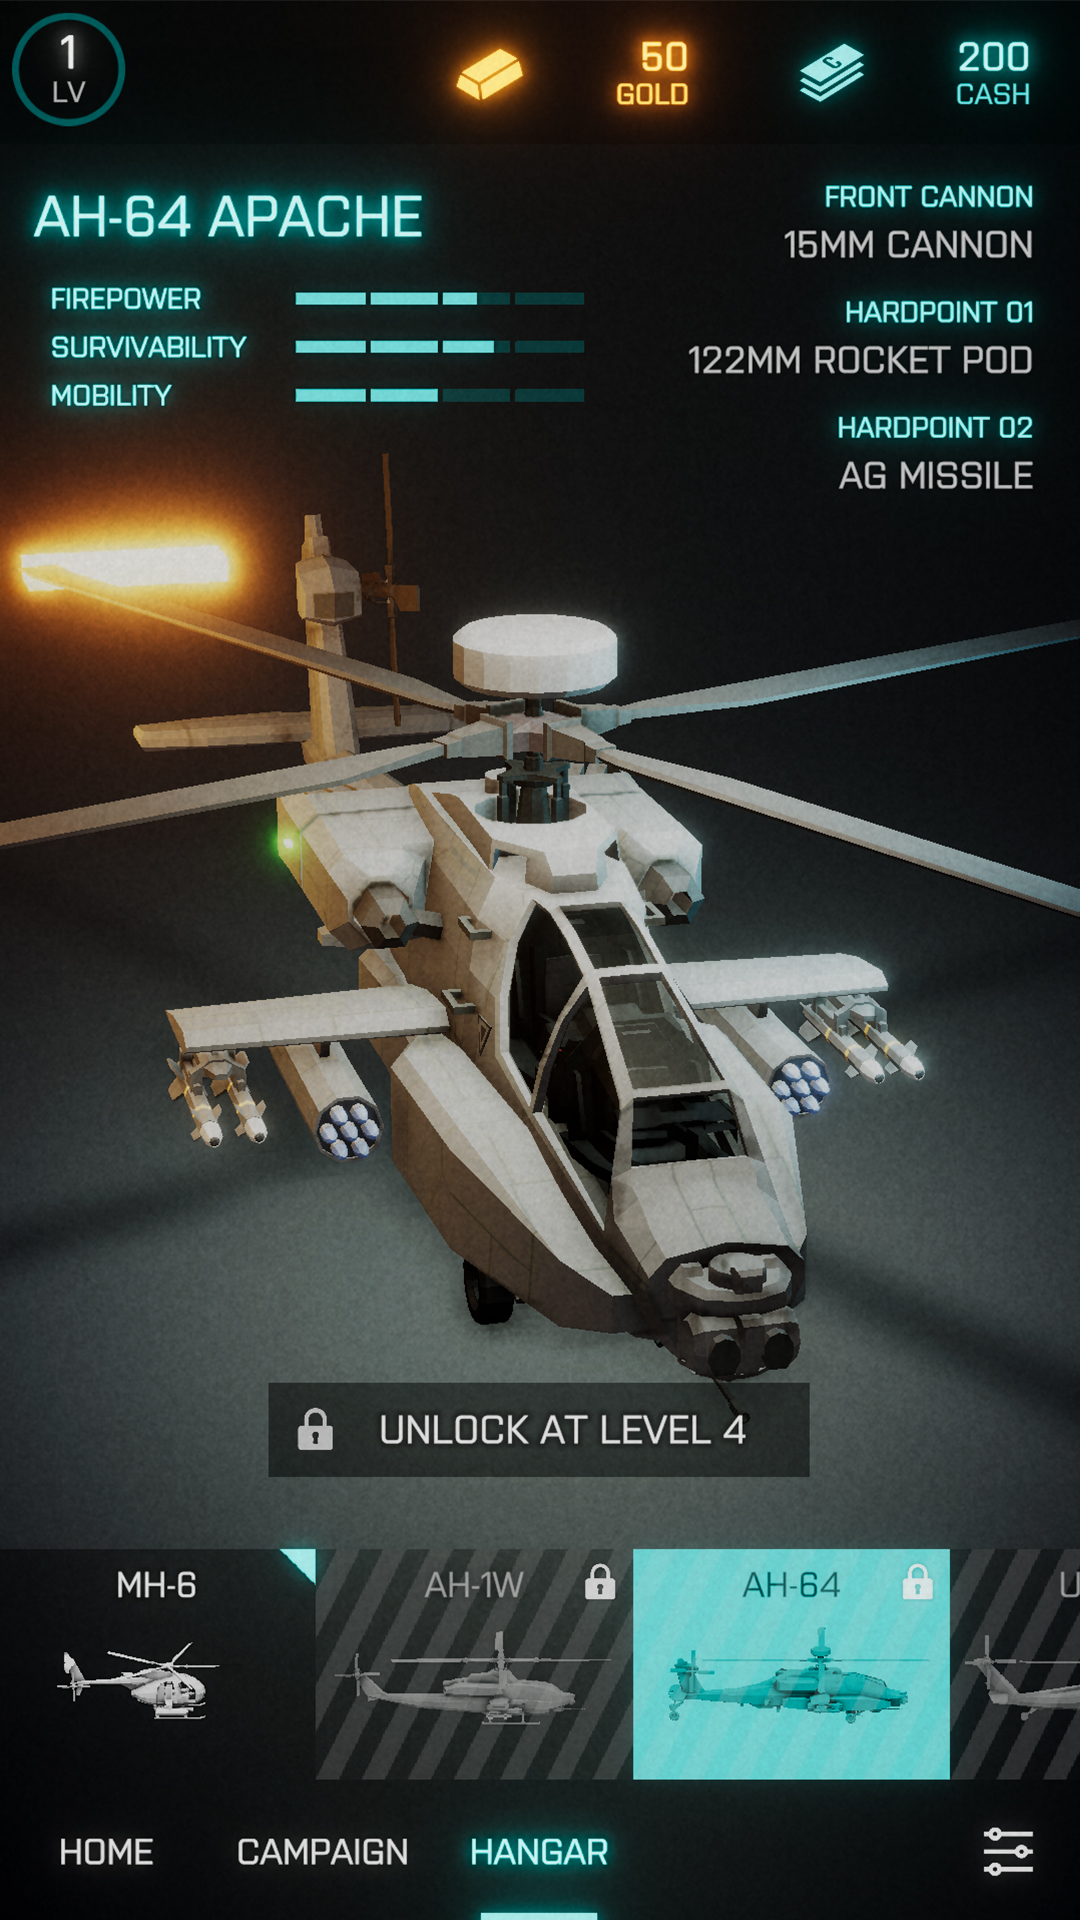 Heli Attack - Android game screenshots.